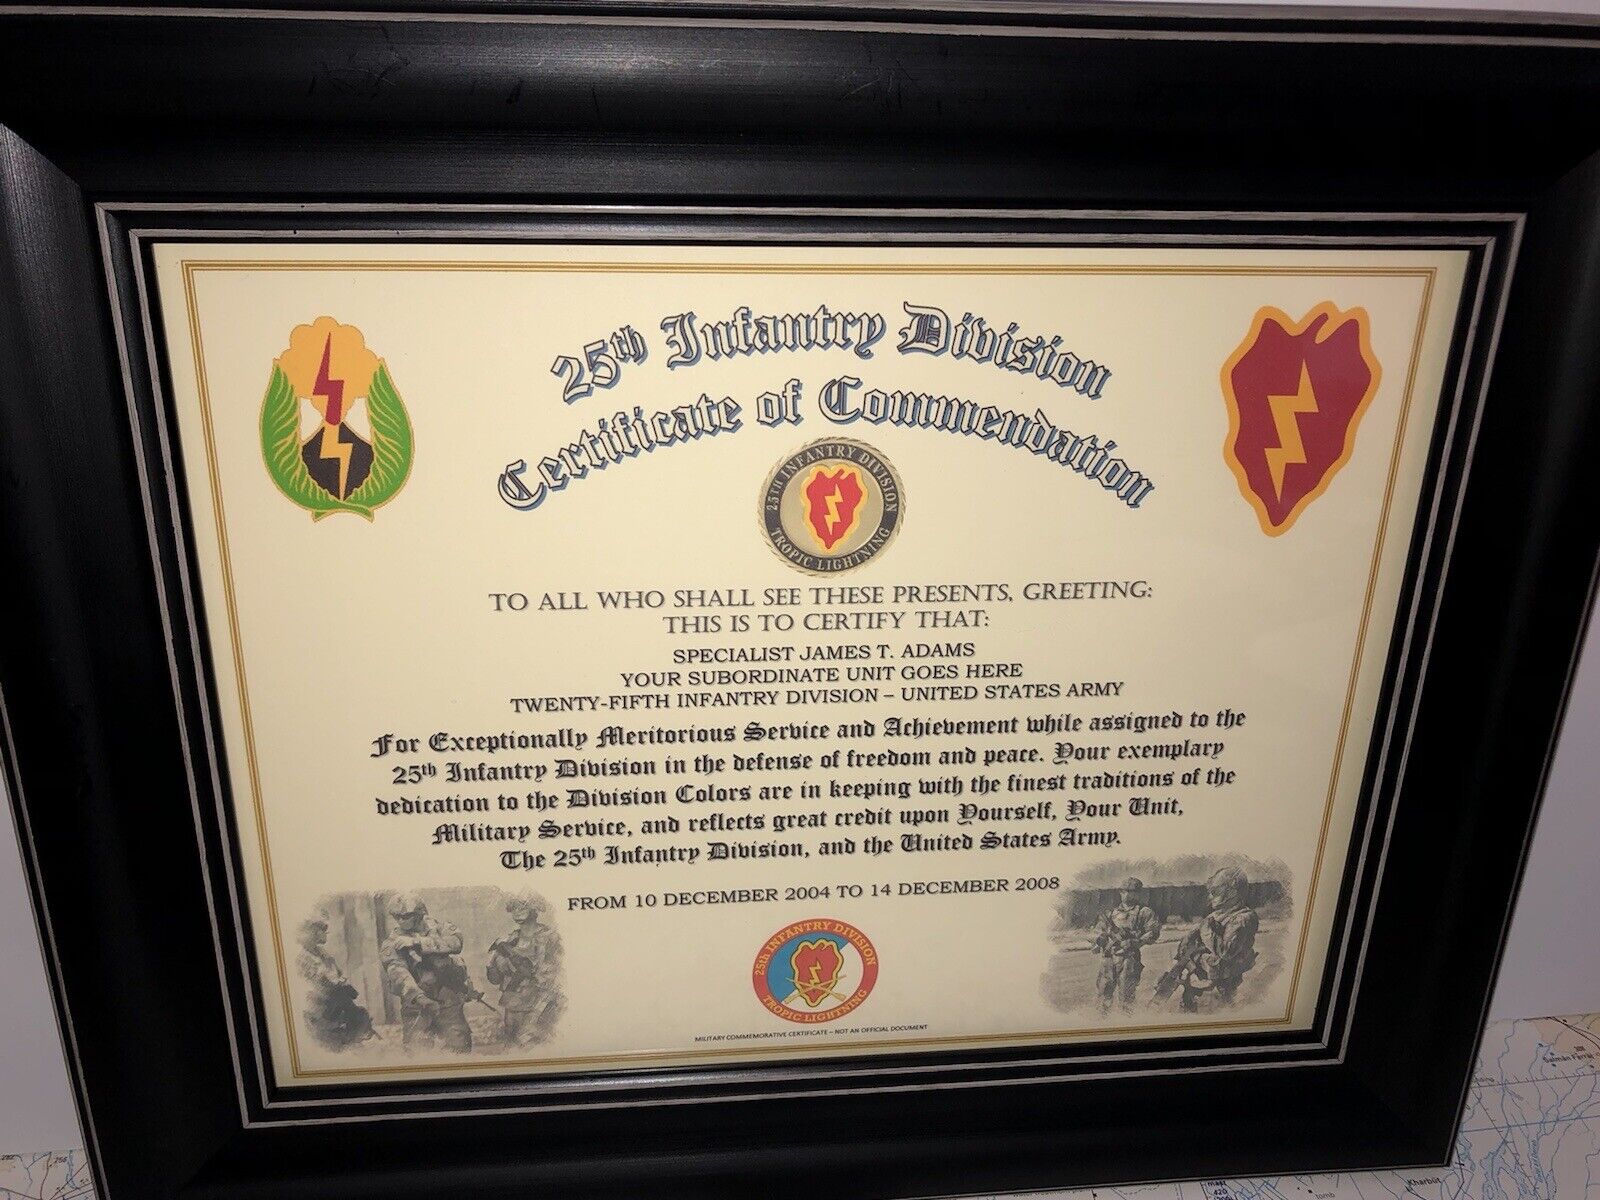 25TH INFANTRY DIVISION / COMMEMORATIVE - CERTIFICATE OF COMMENDATION